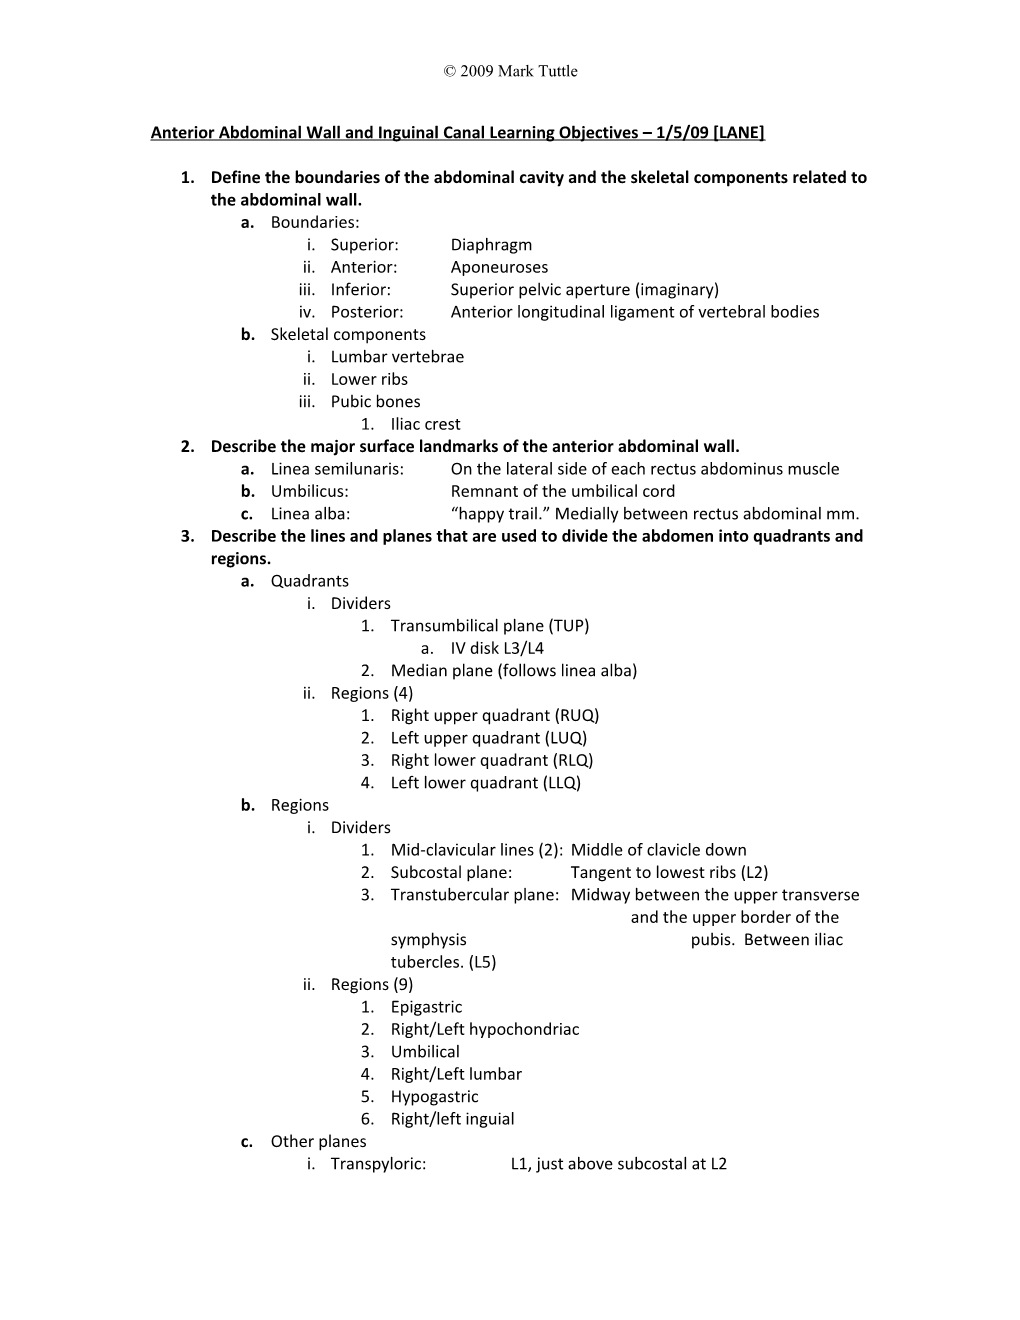 Anterior Abdominal Wall and Inguinal Canal Learning Objectives 1/5/09